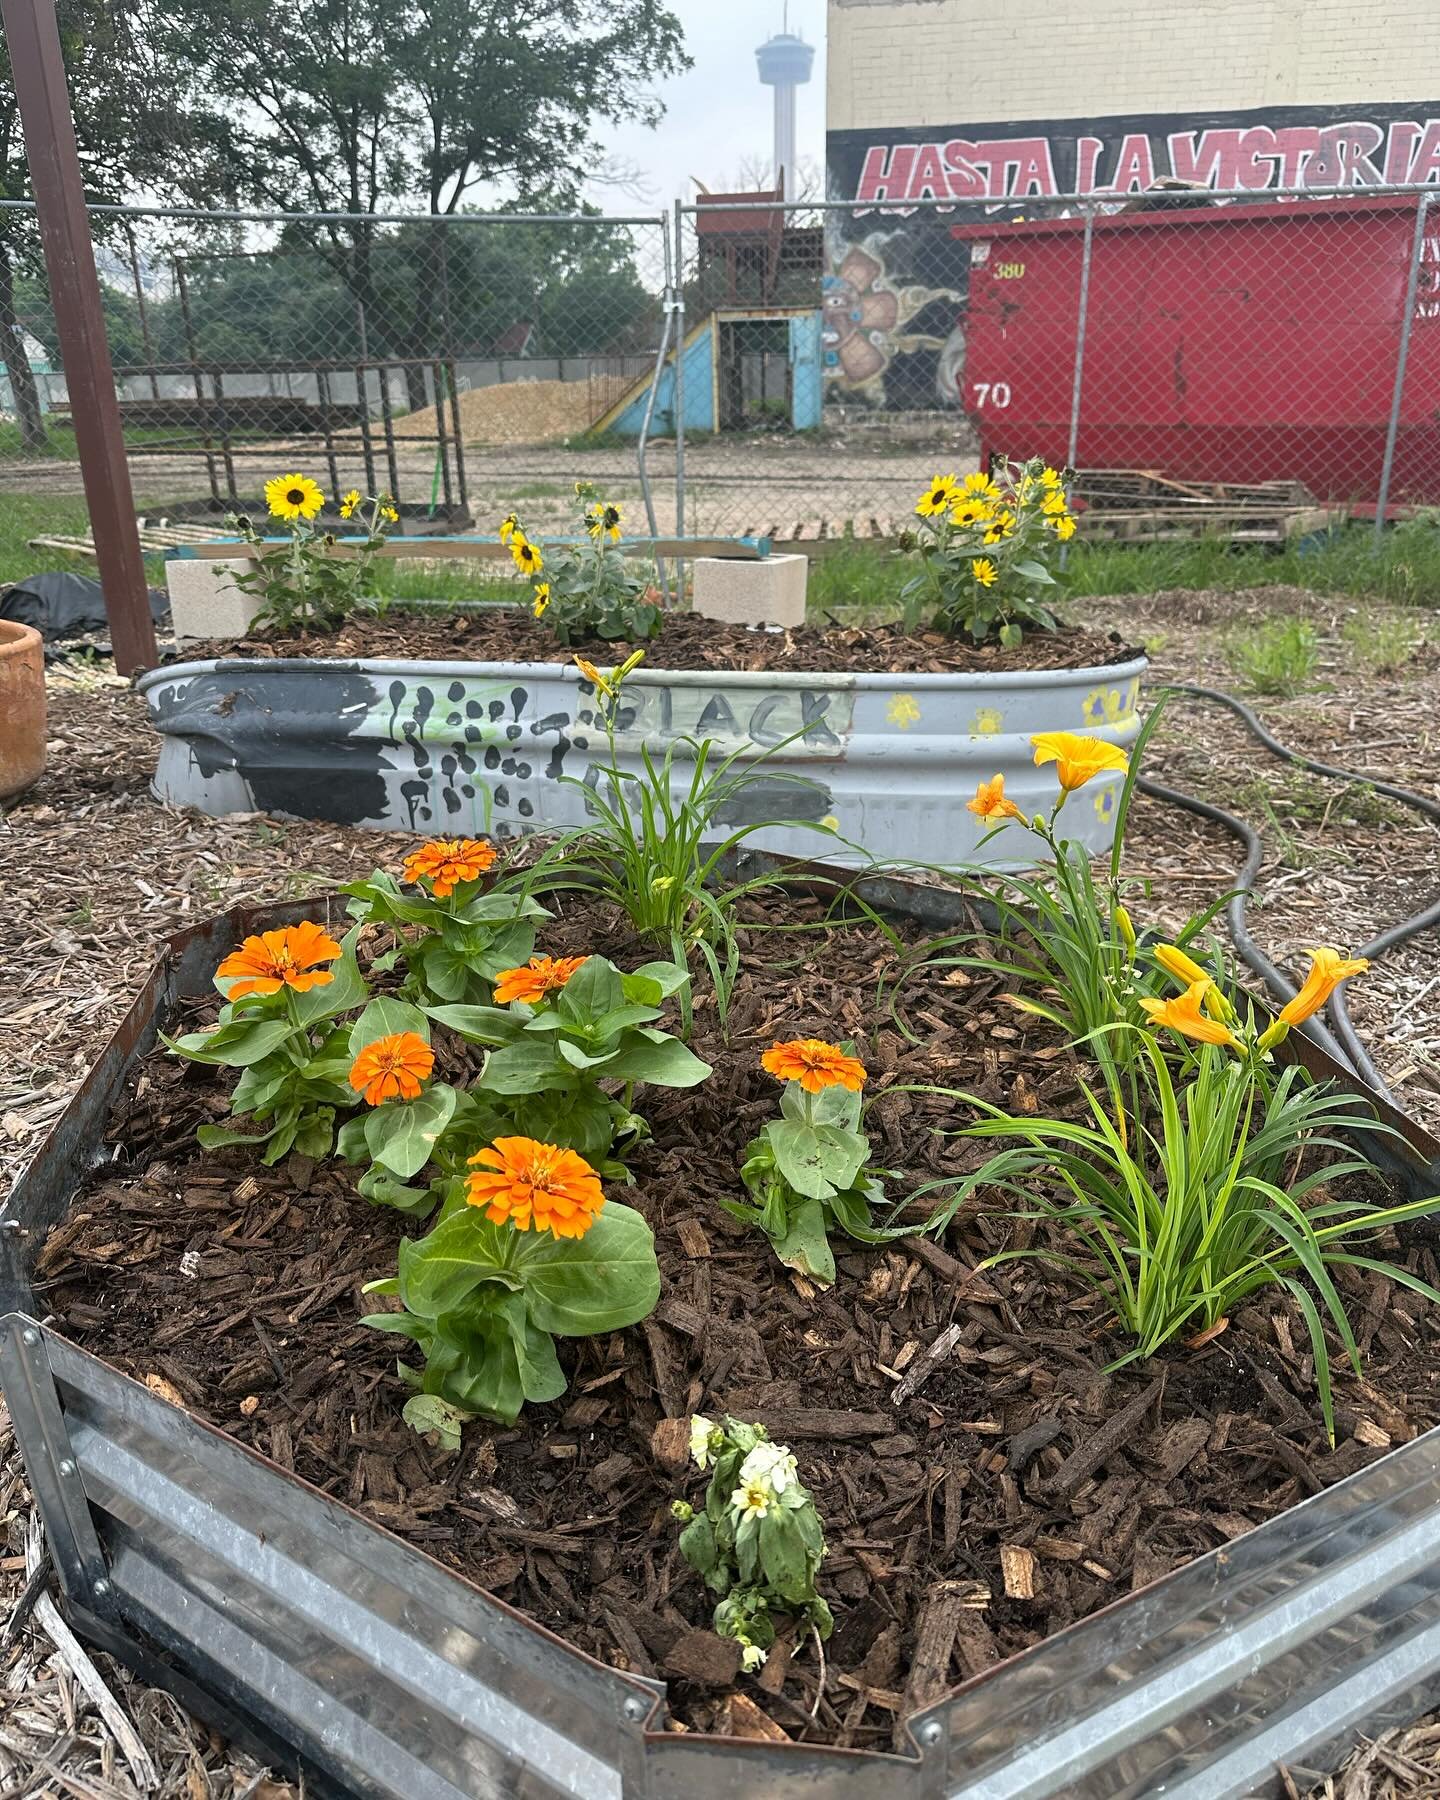 Thanks to the amazing volunteers who came to our garden workday yesterday! We were able to spruce up our space with new plants and soil just in time for our anniversary celebration next Saturday on May 18th 🌱